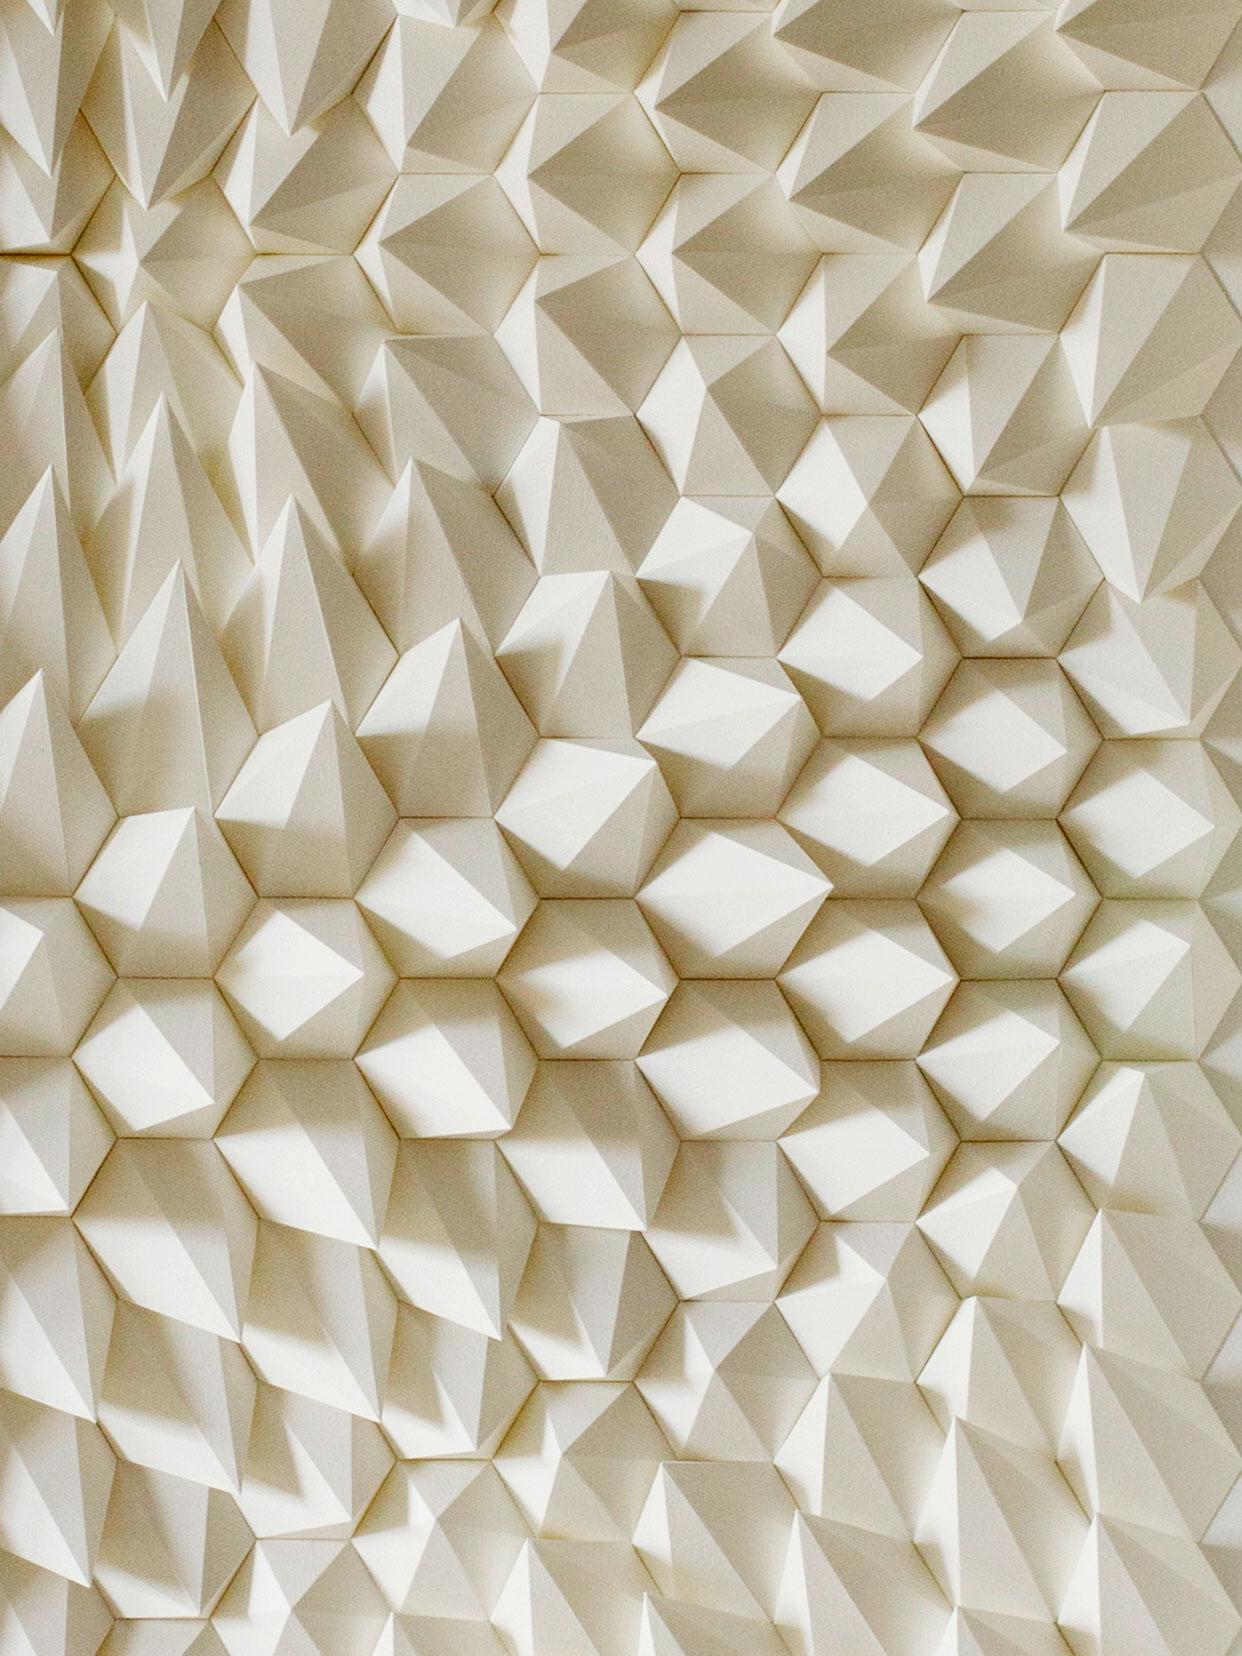 U 185 - white abstract geometric minimalist 3D composition with folded paper  - Art by Anna Kruhelska